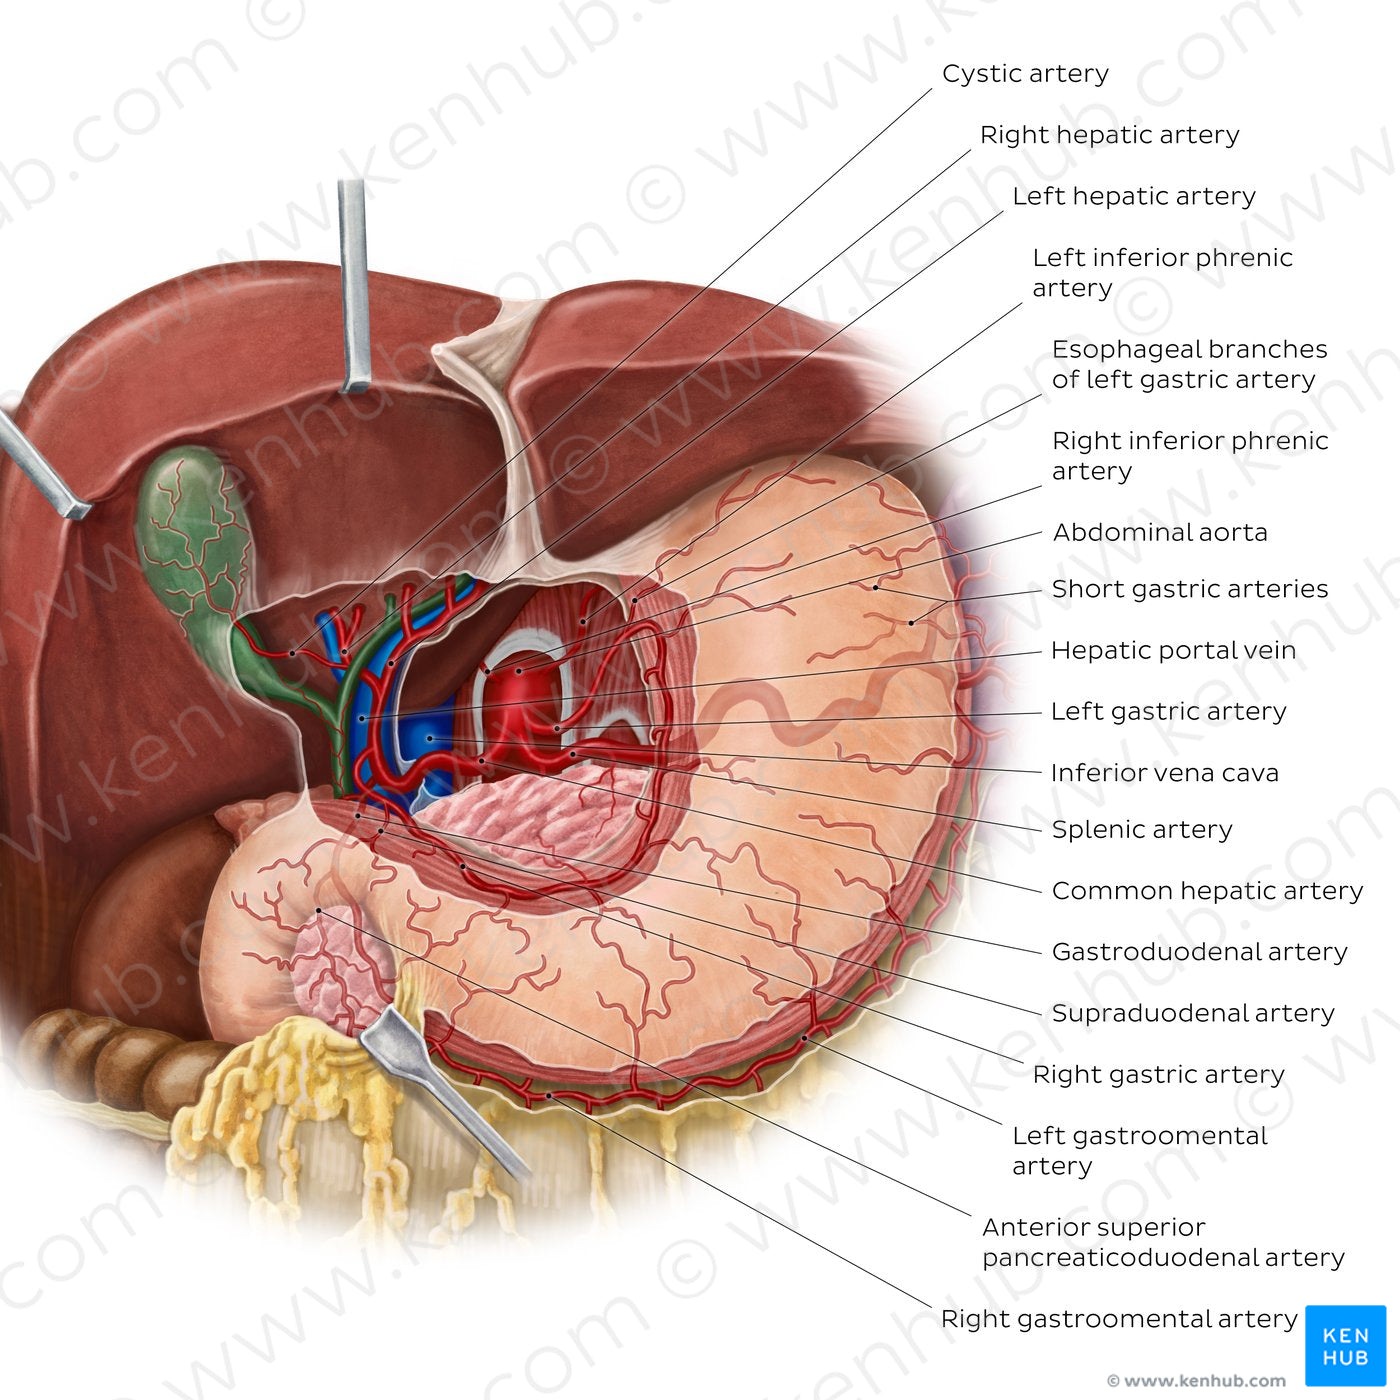 Arteries of the stomach, liver and spleen (English)